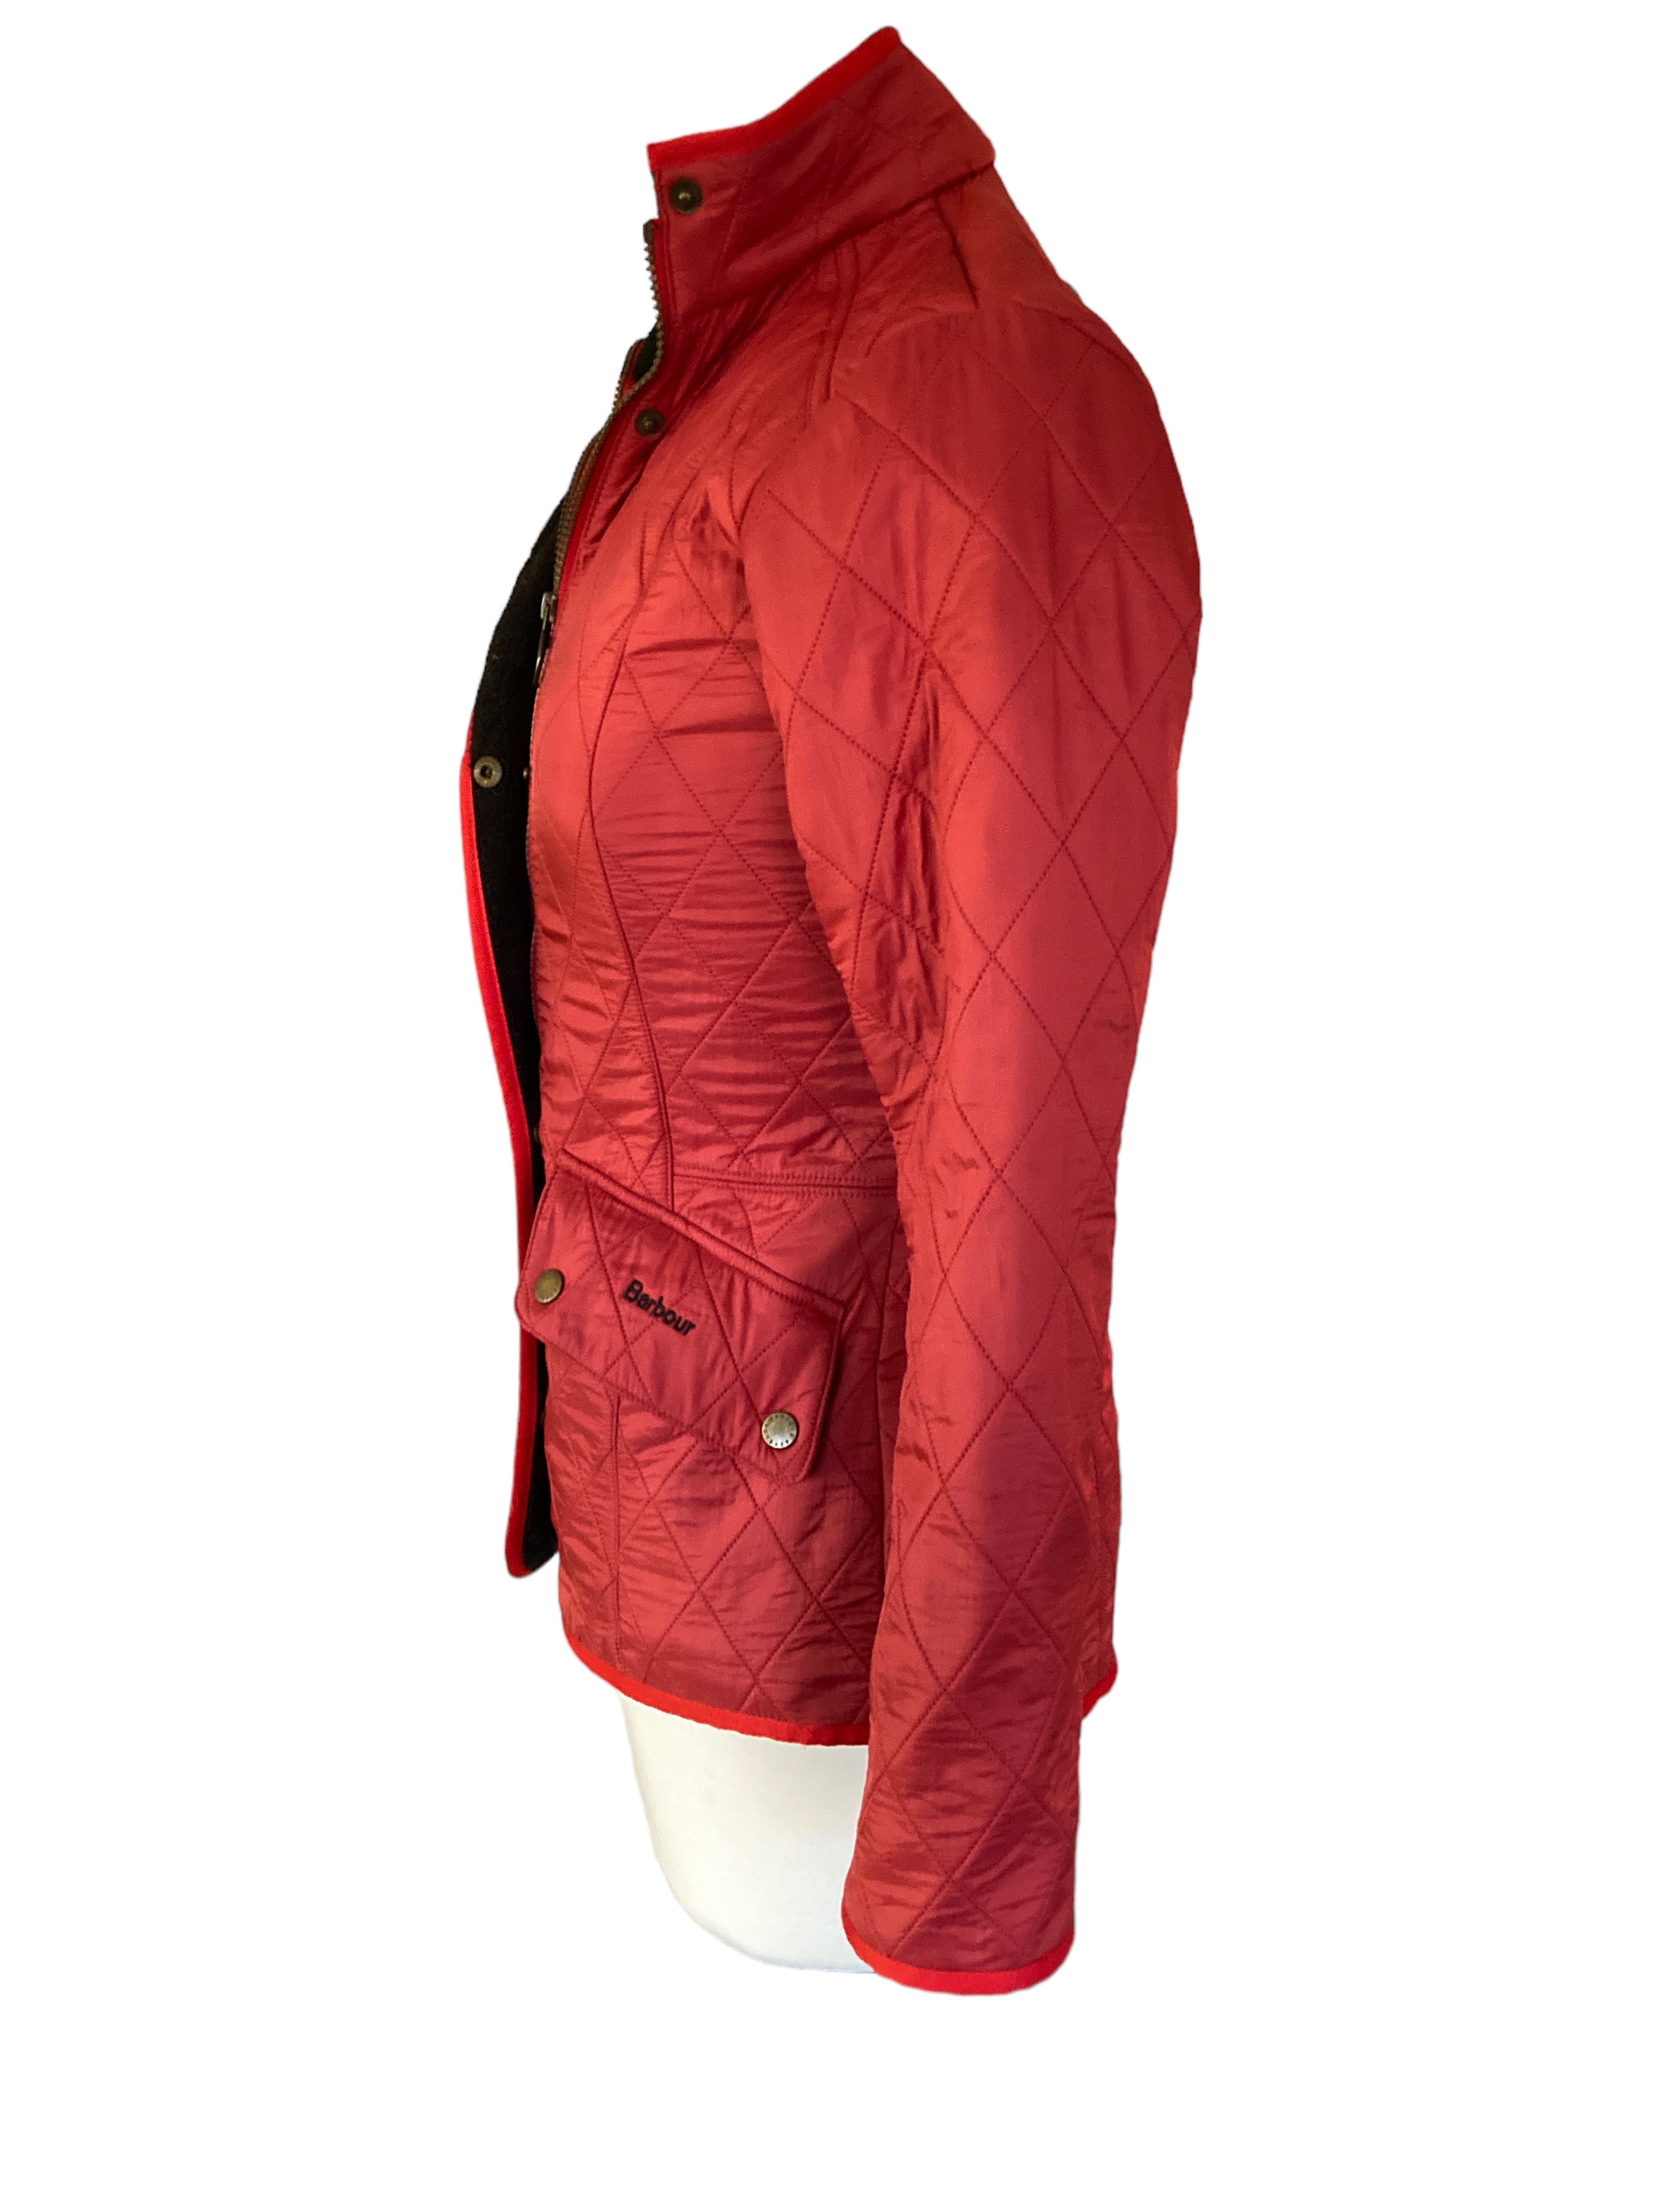 Barbour Red Cavalry Polarquilt Jacket, 4